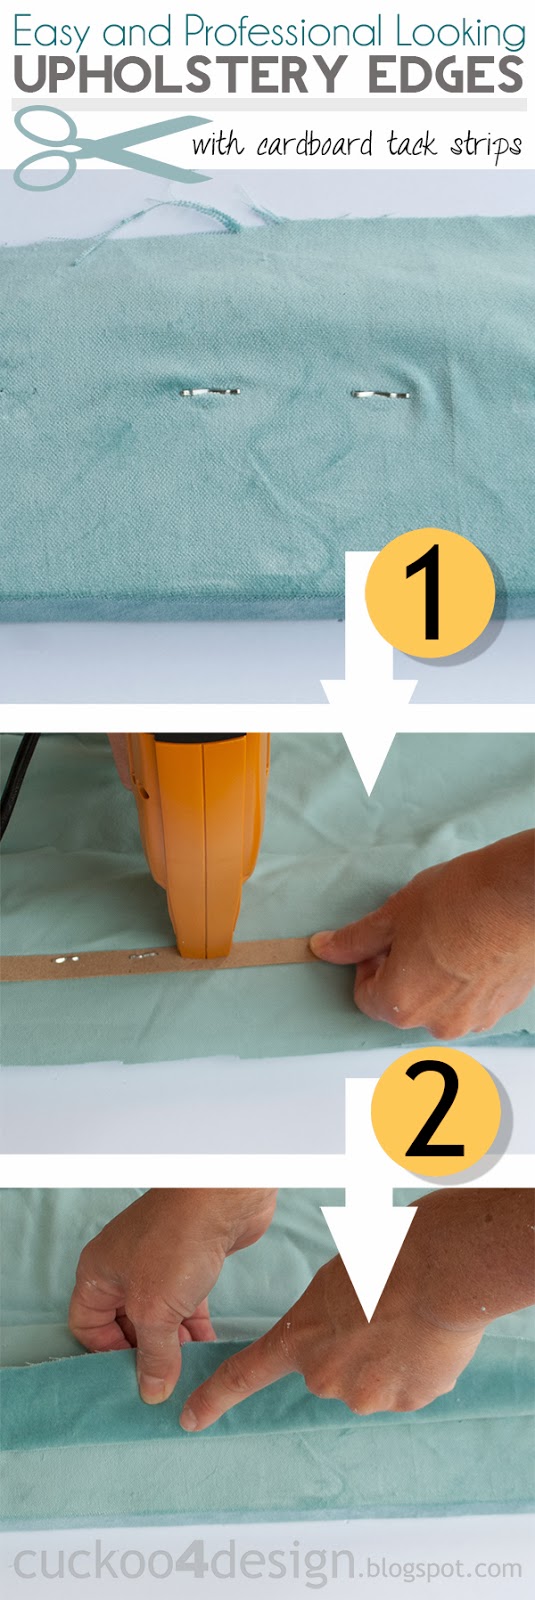 steps that show how to use the cardboard upholstery tack strip